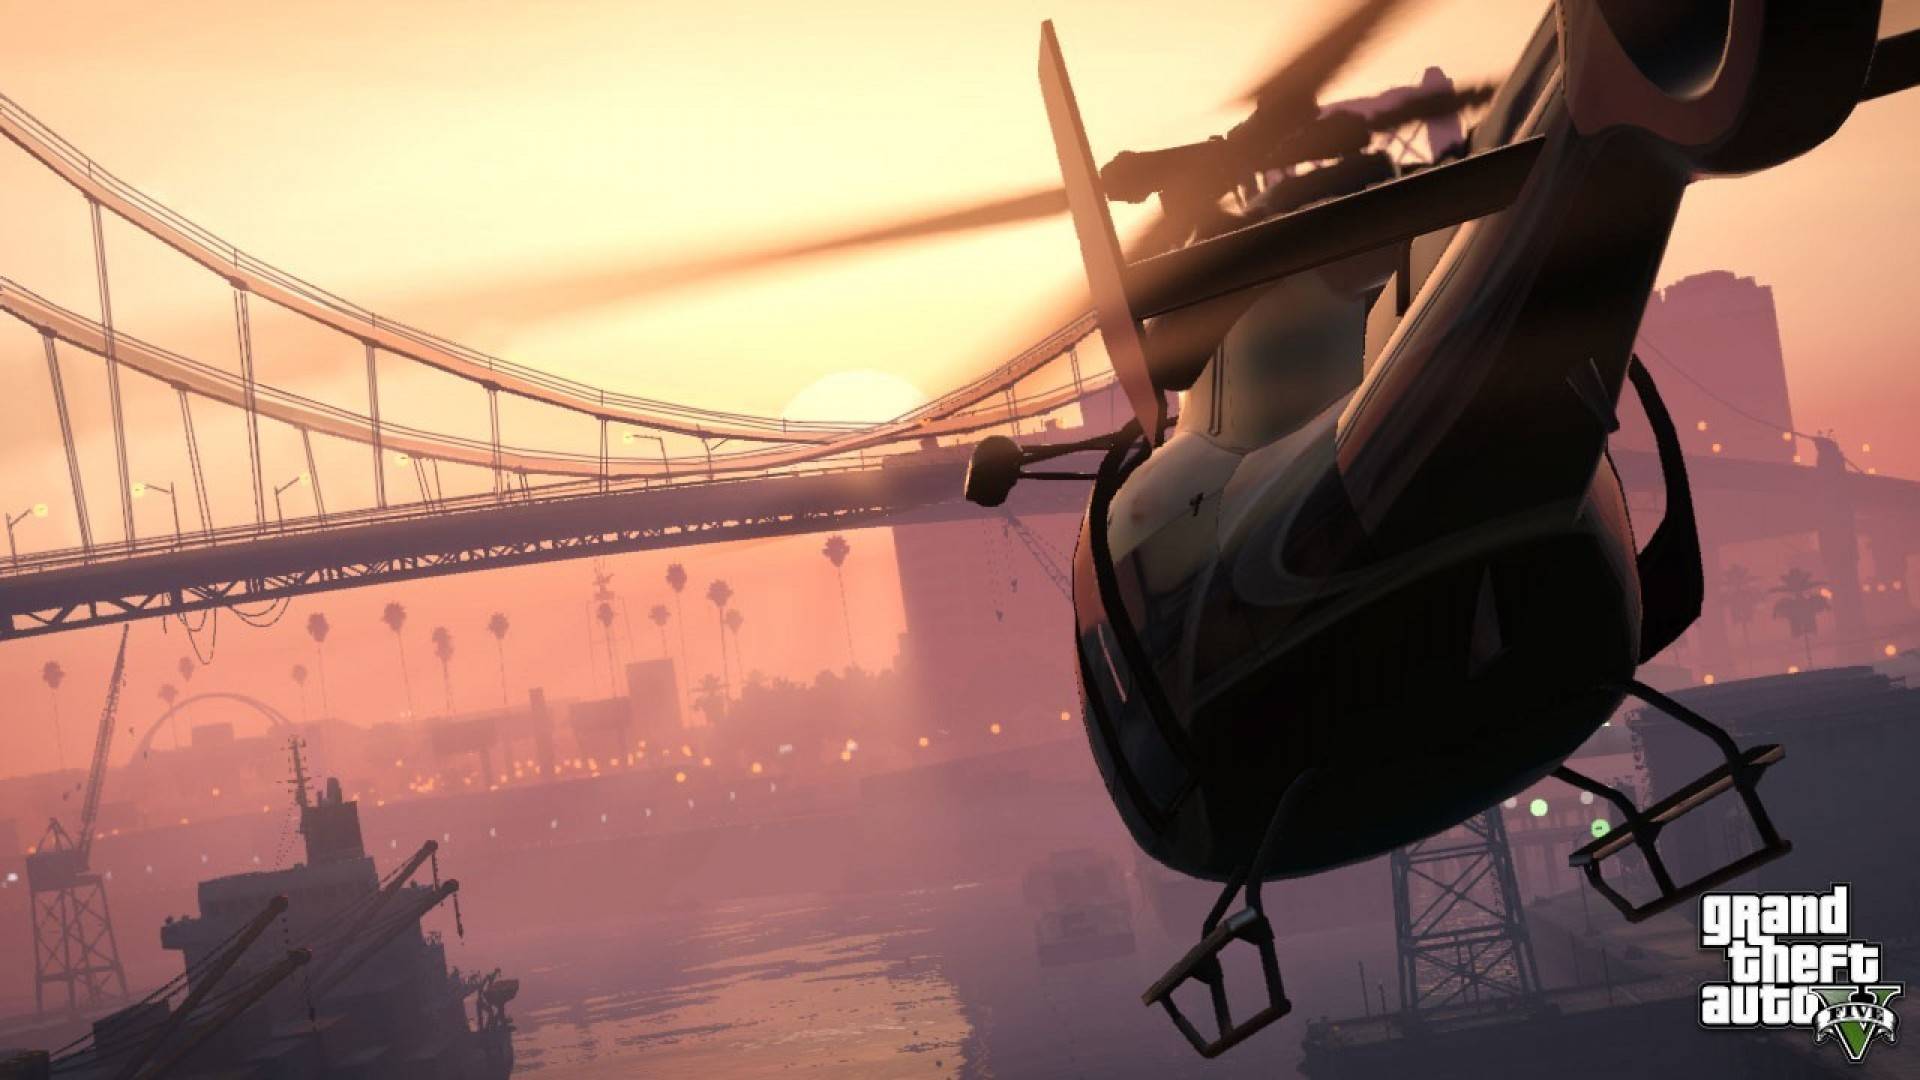 Grand Theft Auto (gta) 5 Hd Wallpaper - Free Android Application ...